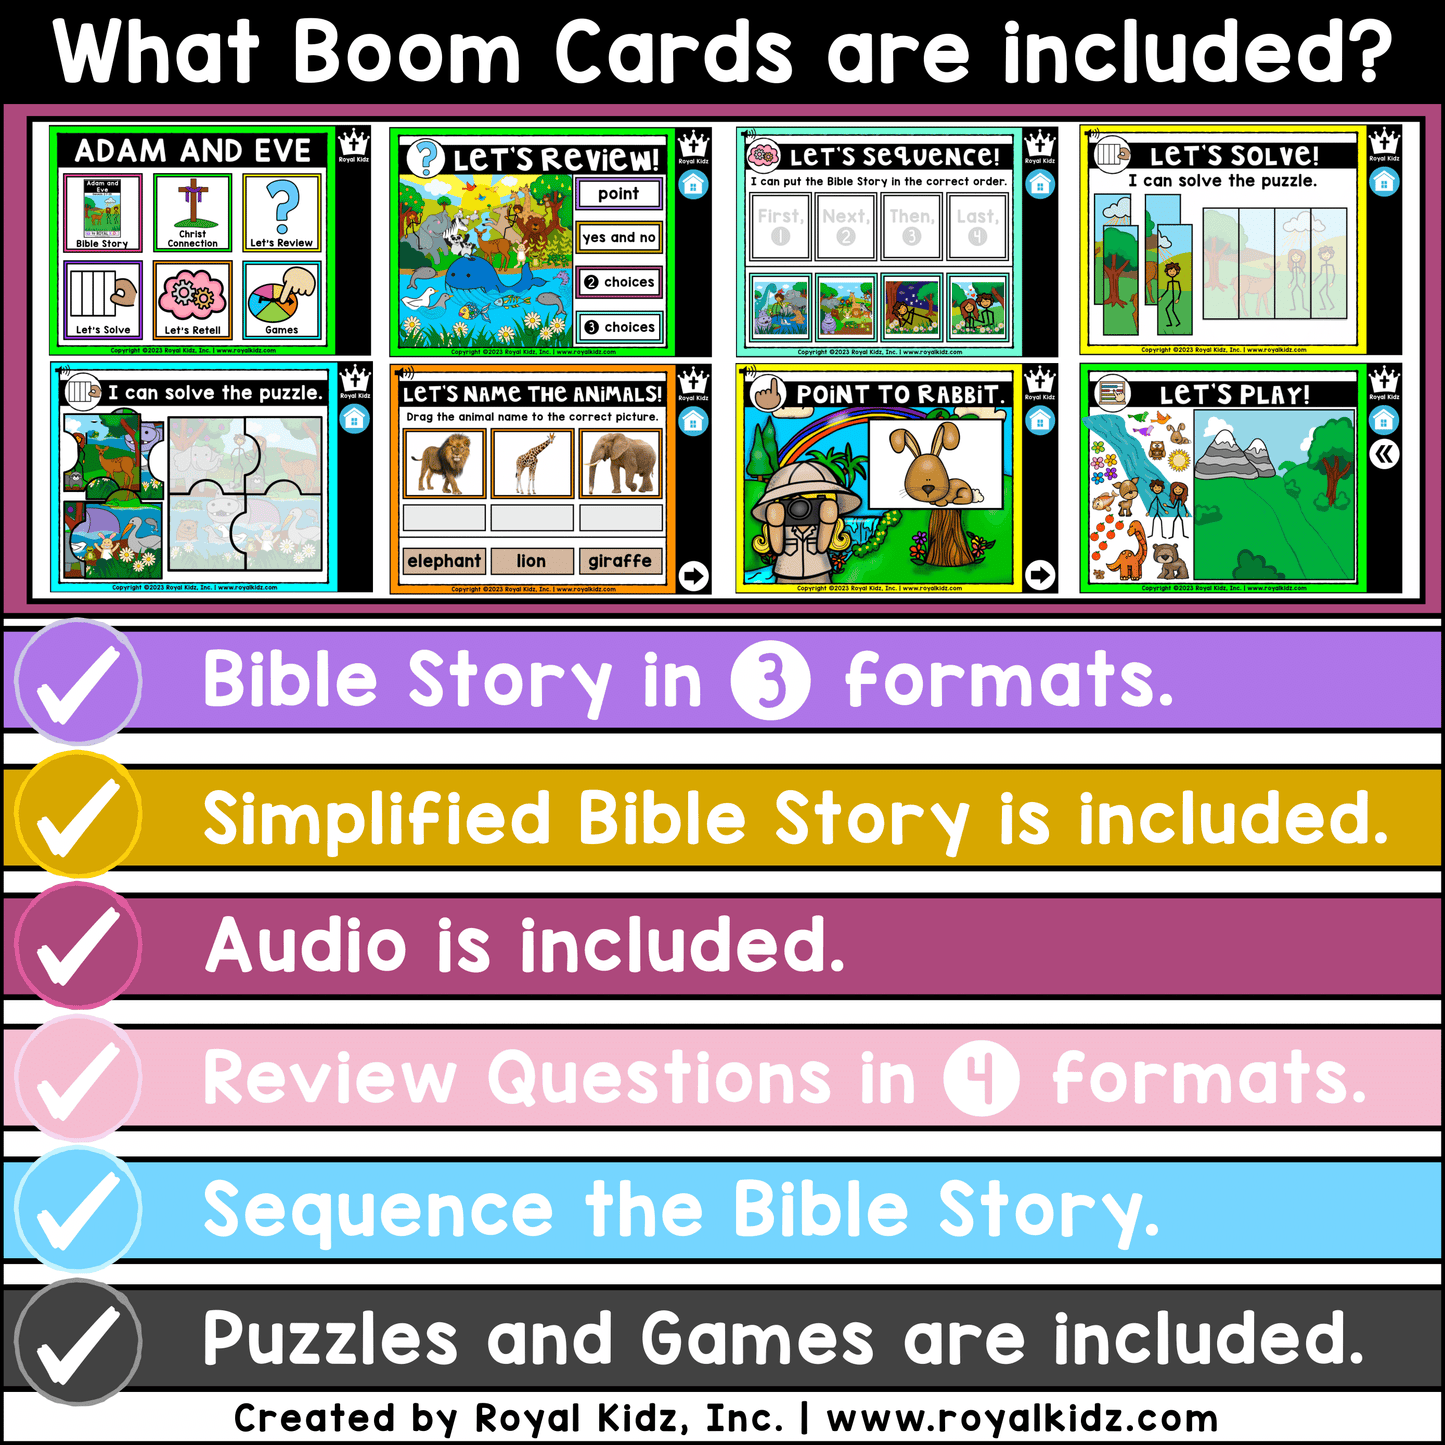 Bible Story Adapted Books WITH Symbol Supports + Bible Boom Cards™ SET 1 BUNDLE